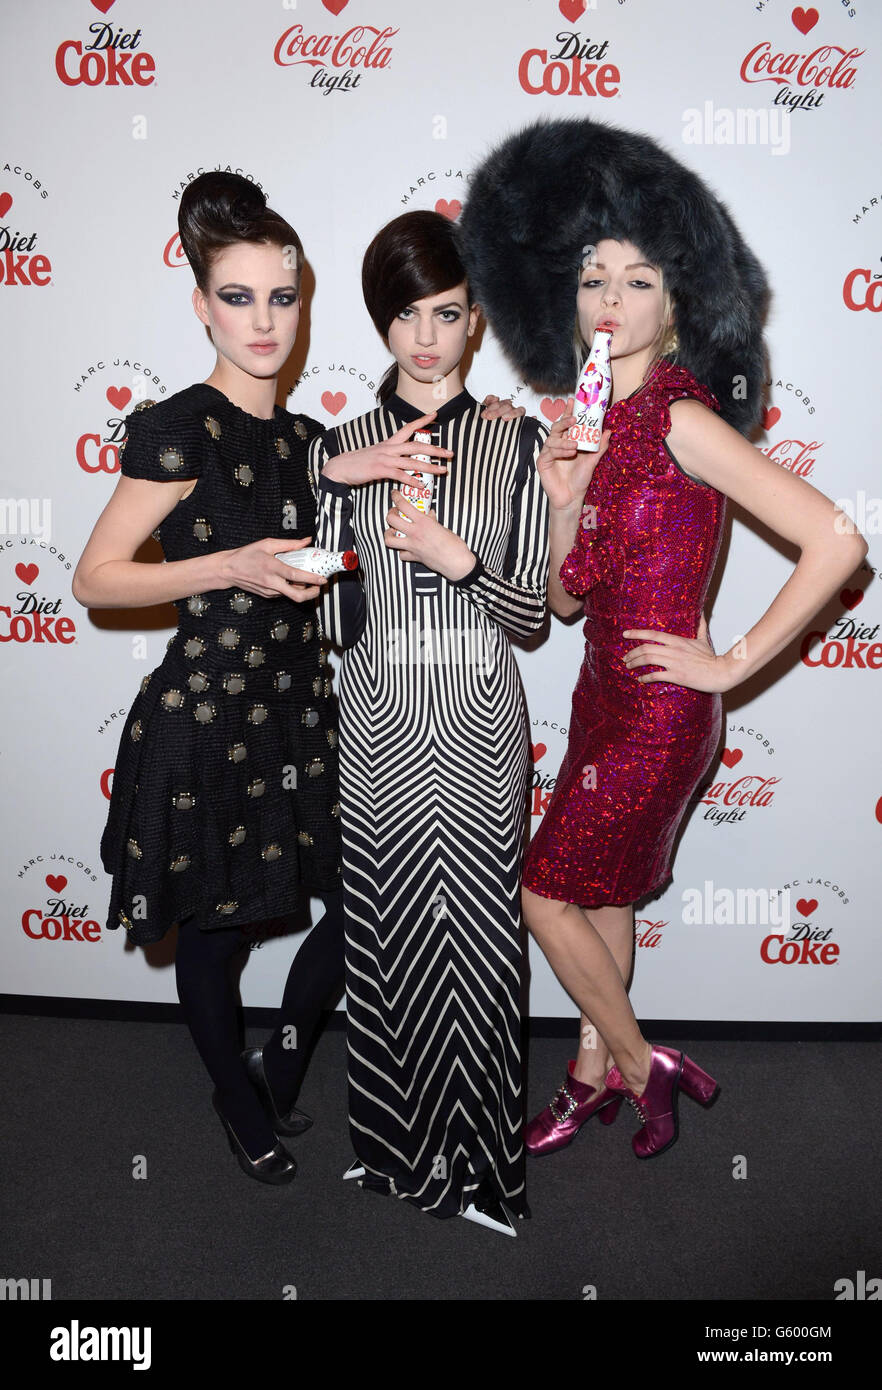 (left to right) Eliza Cummings, Lily McMenamy and Ginta Lapina at The Diet Coke and Marc Jacobs launch party to celebrate 30 years of Diet Coke, at the German Gymnasium, Kings Cross, London. Stock Photo